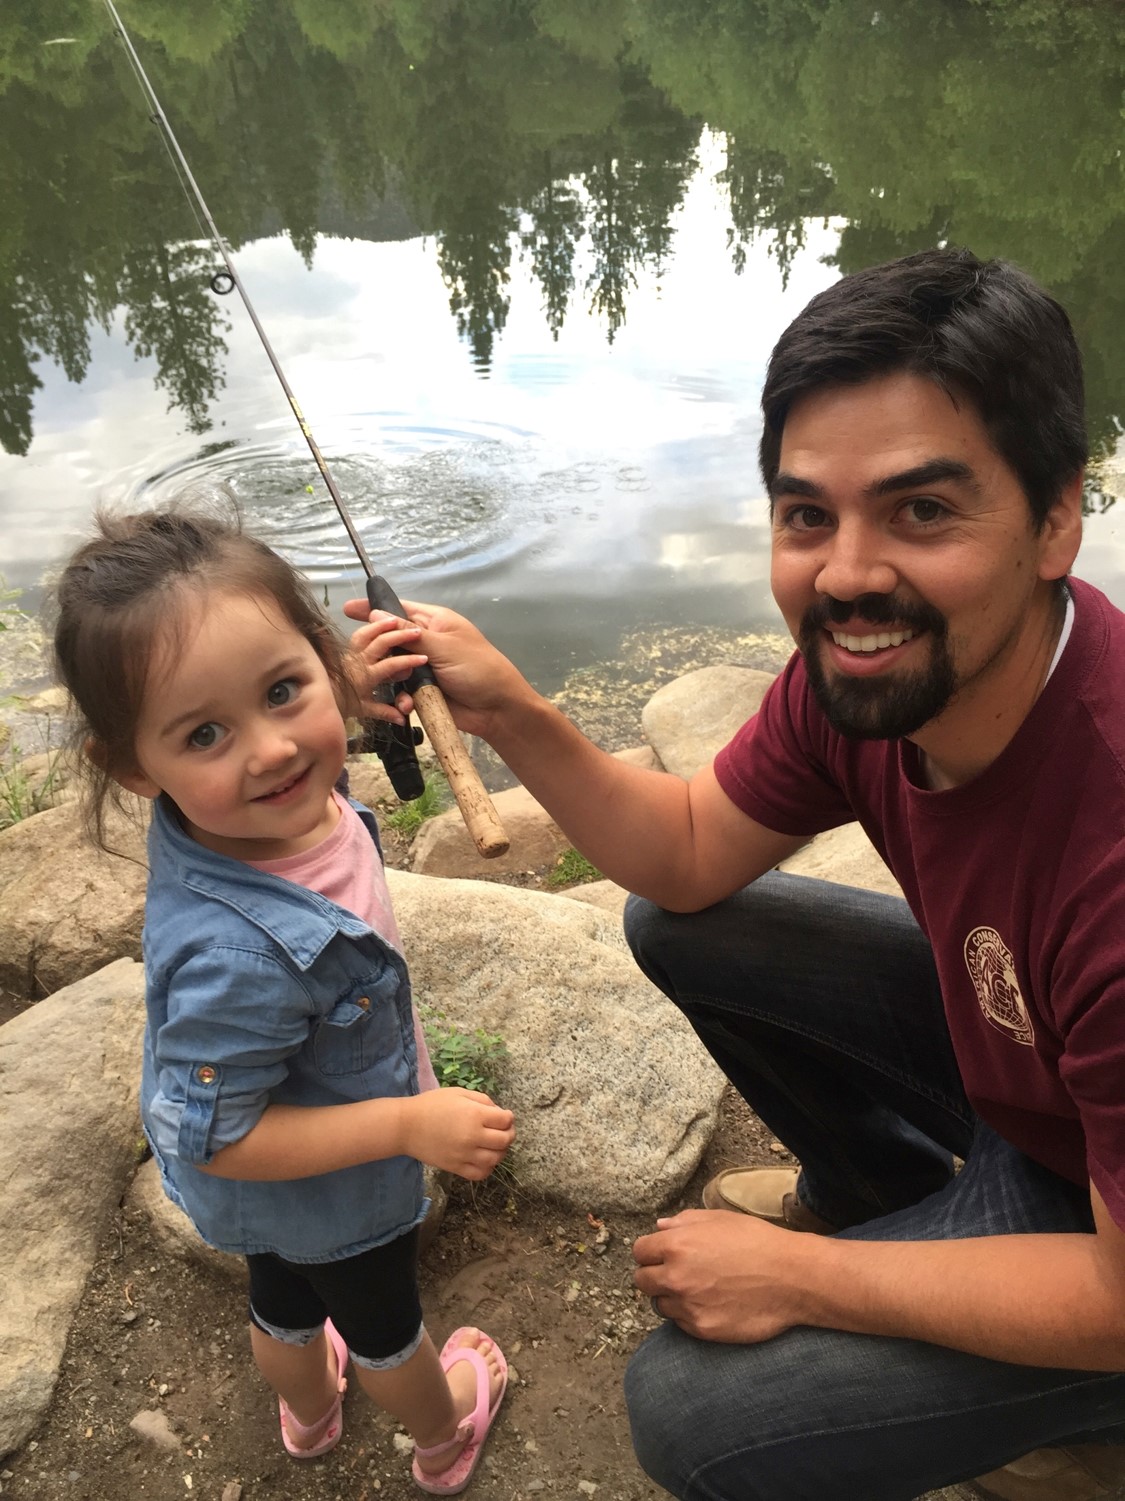     
 
       
 
      Jacob Palma and his daughter Kaylie fishing on Silver Lake Uinta Forest. 